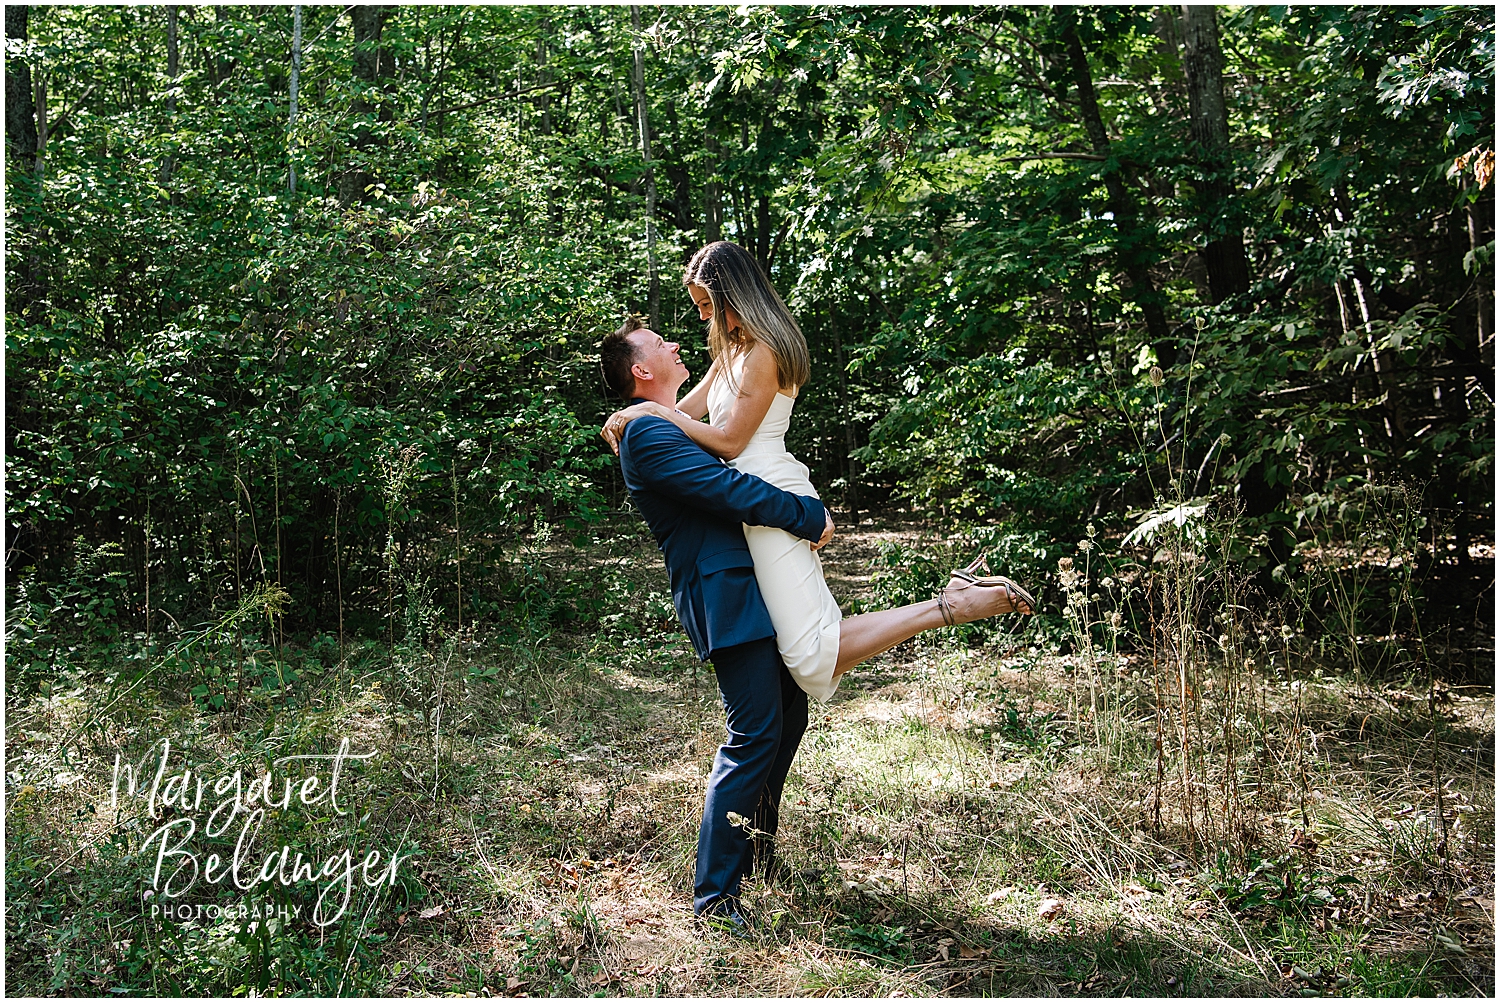 A groom in a blue suit lifting a bride in a simple white wedding dress in a forest clearing.